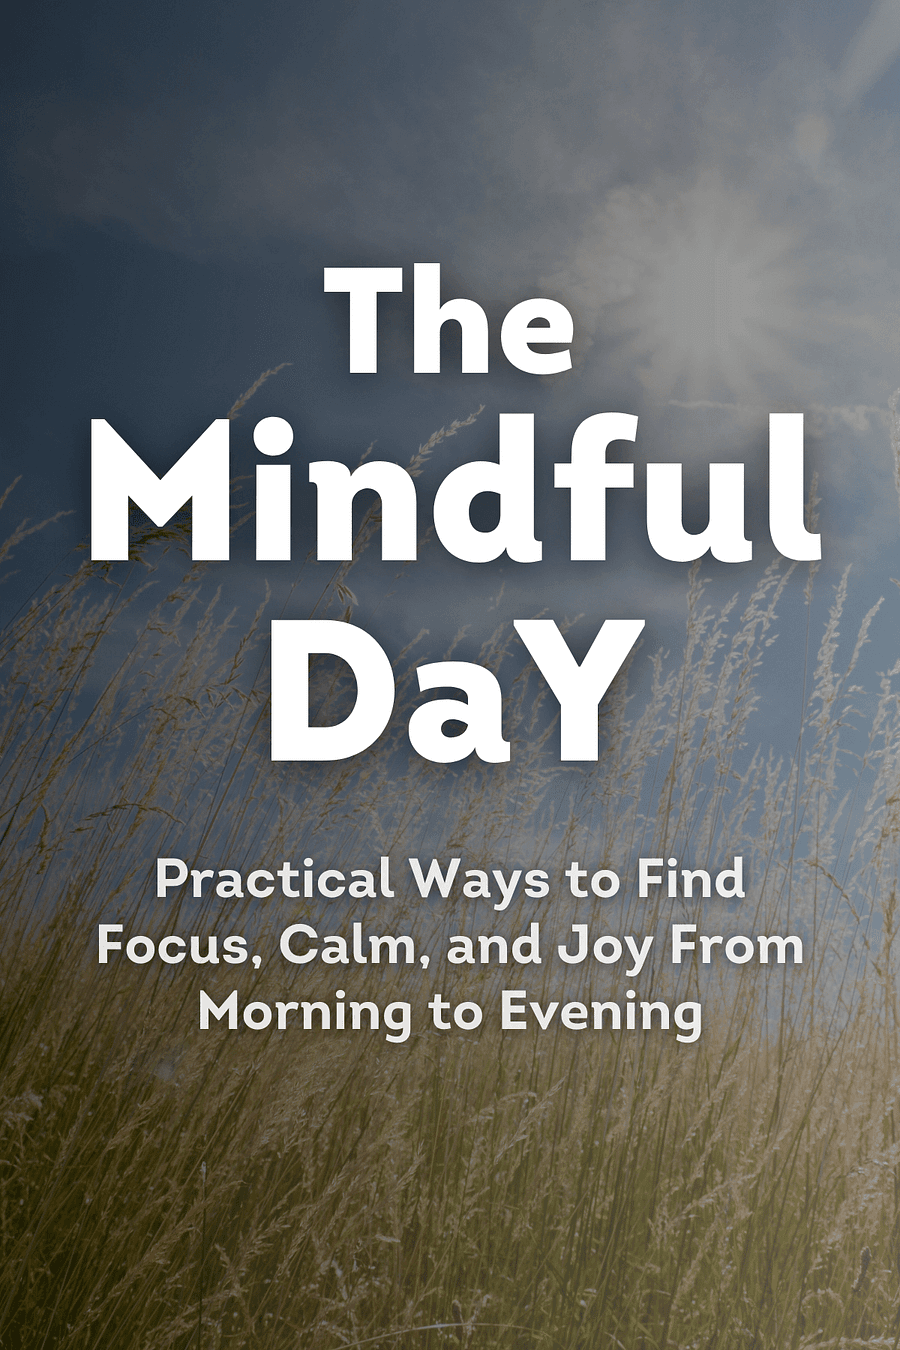 The Mindful Day by Laurie J. Cameron - Book Summary